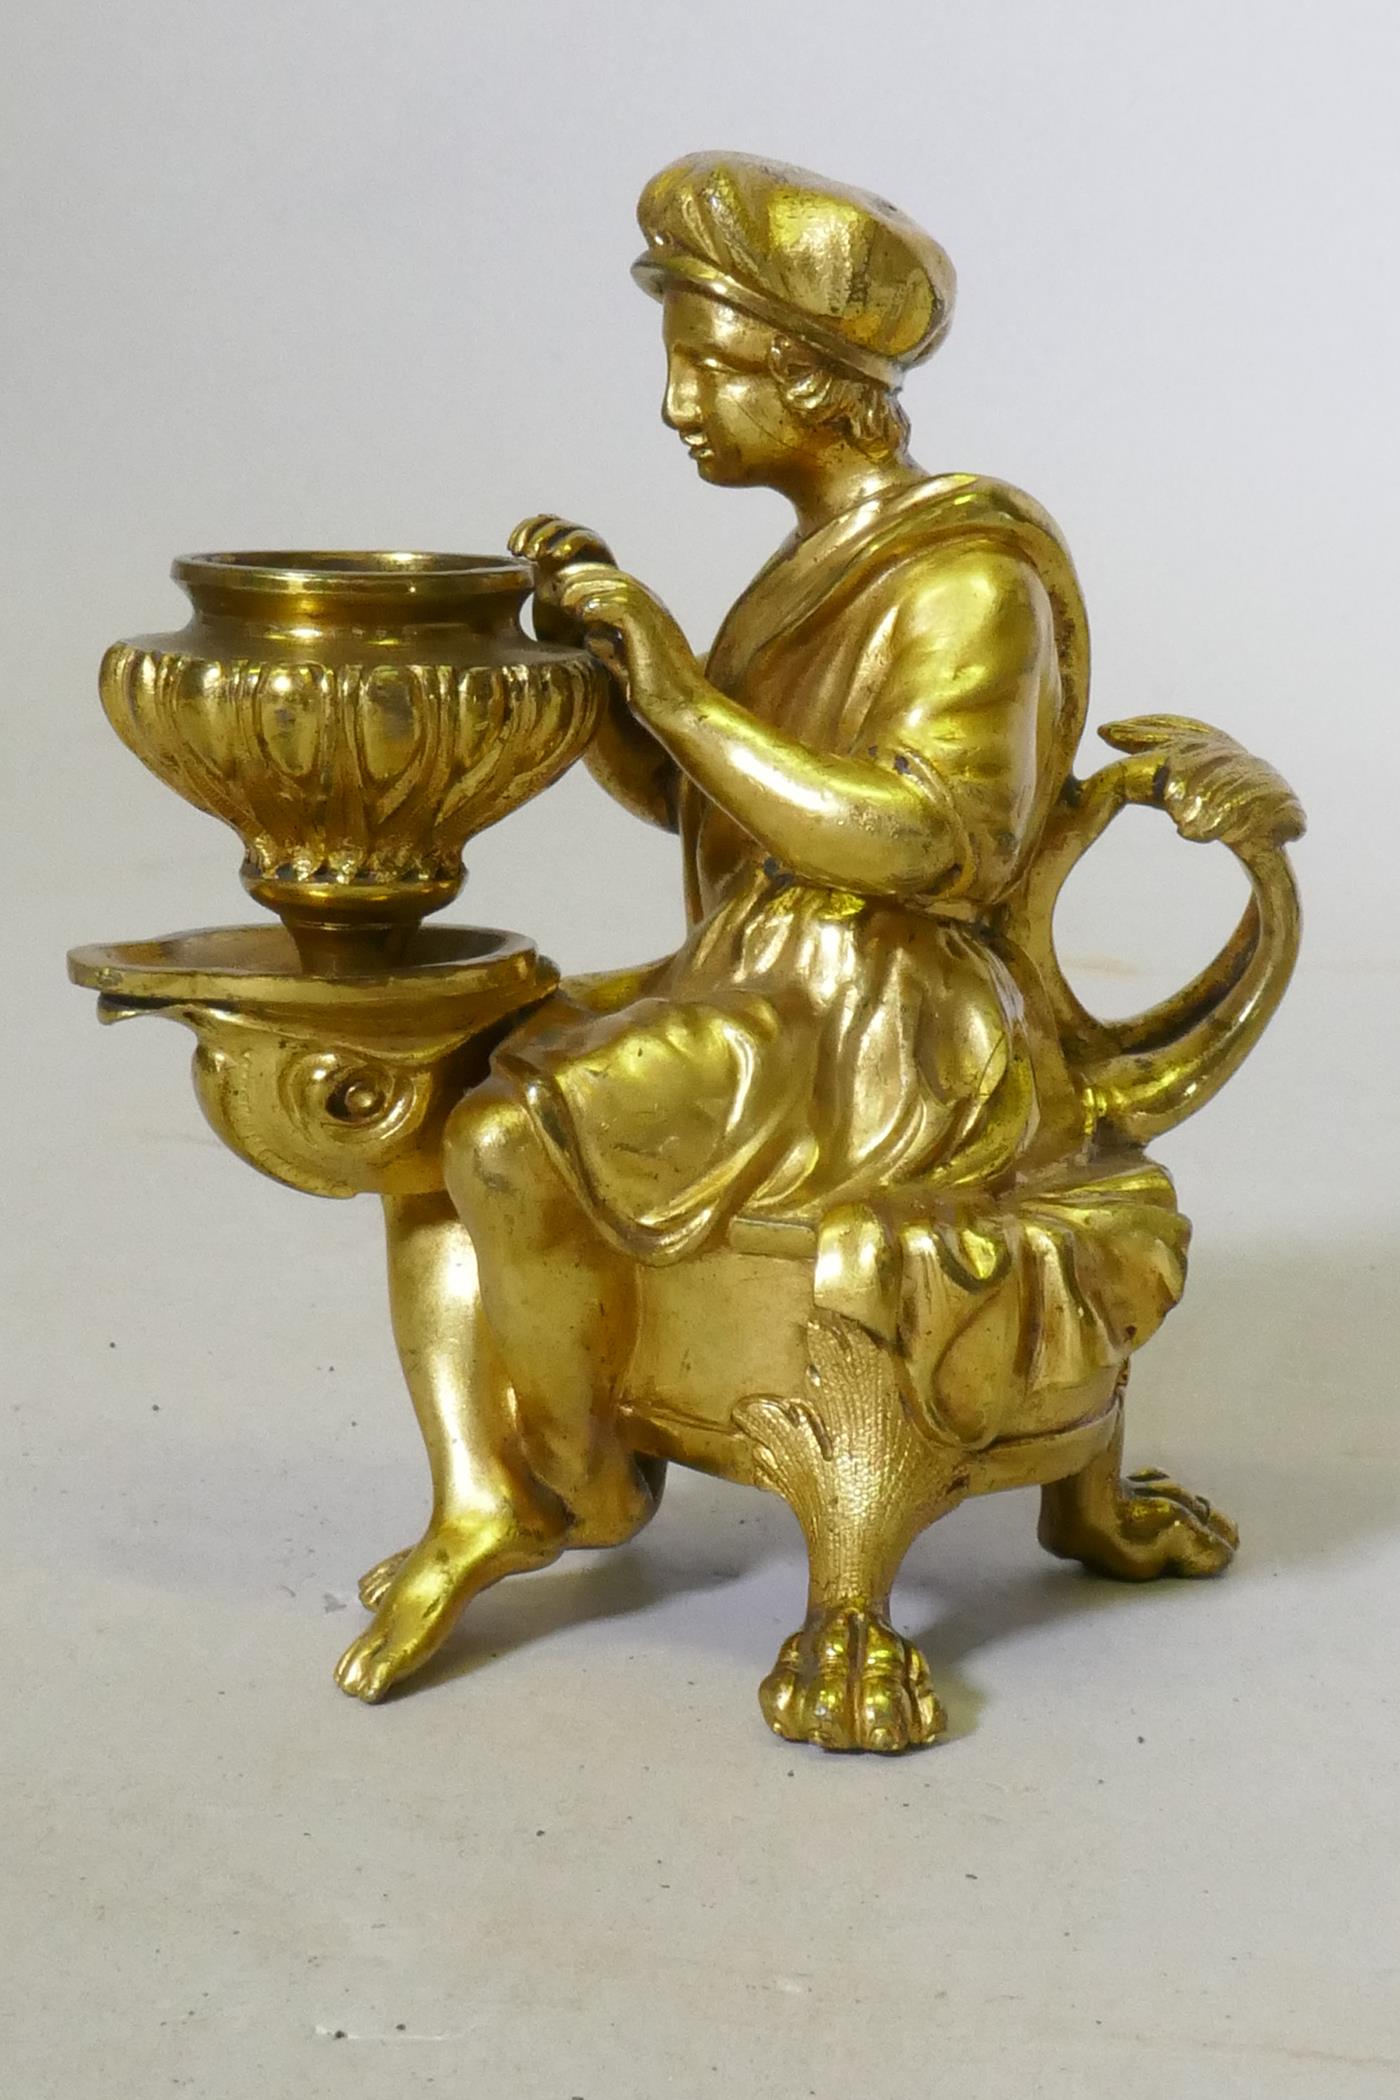 A fine Grand Tour ormolu bronze chamberstick in the form of a page seated upon a dolphin, C18th/